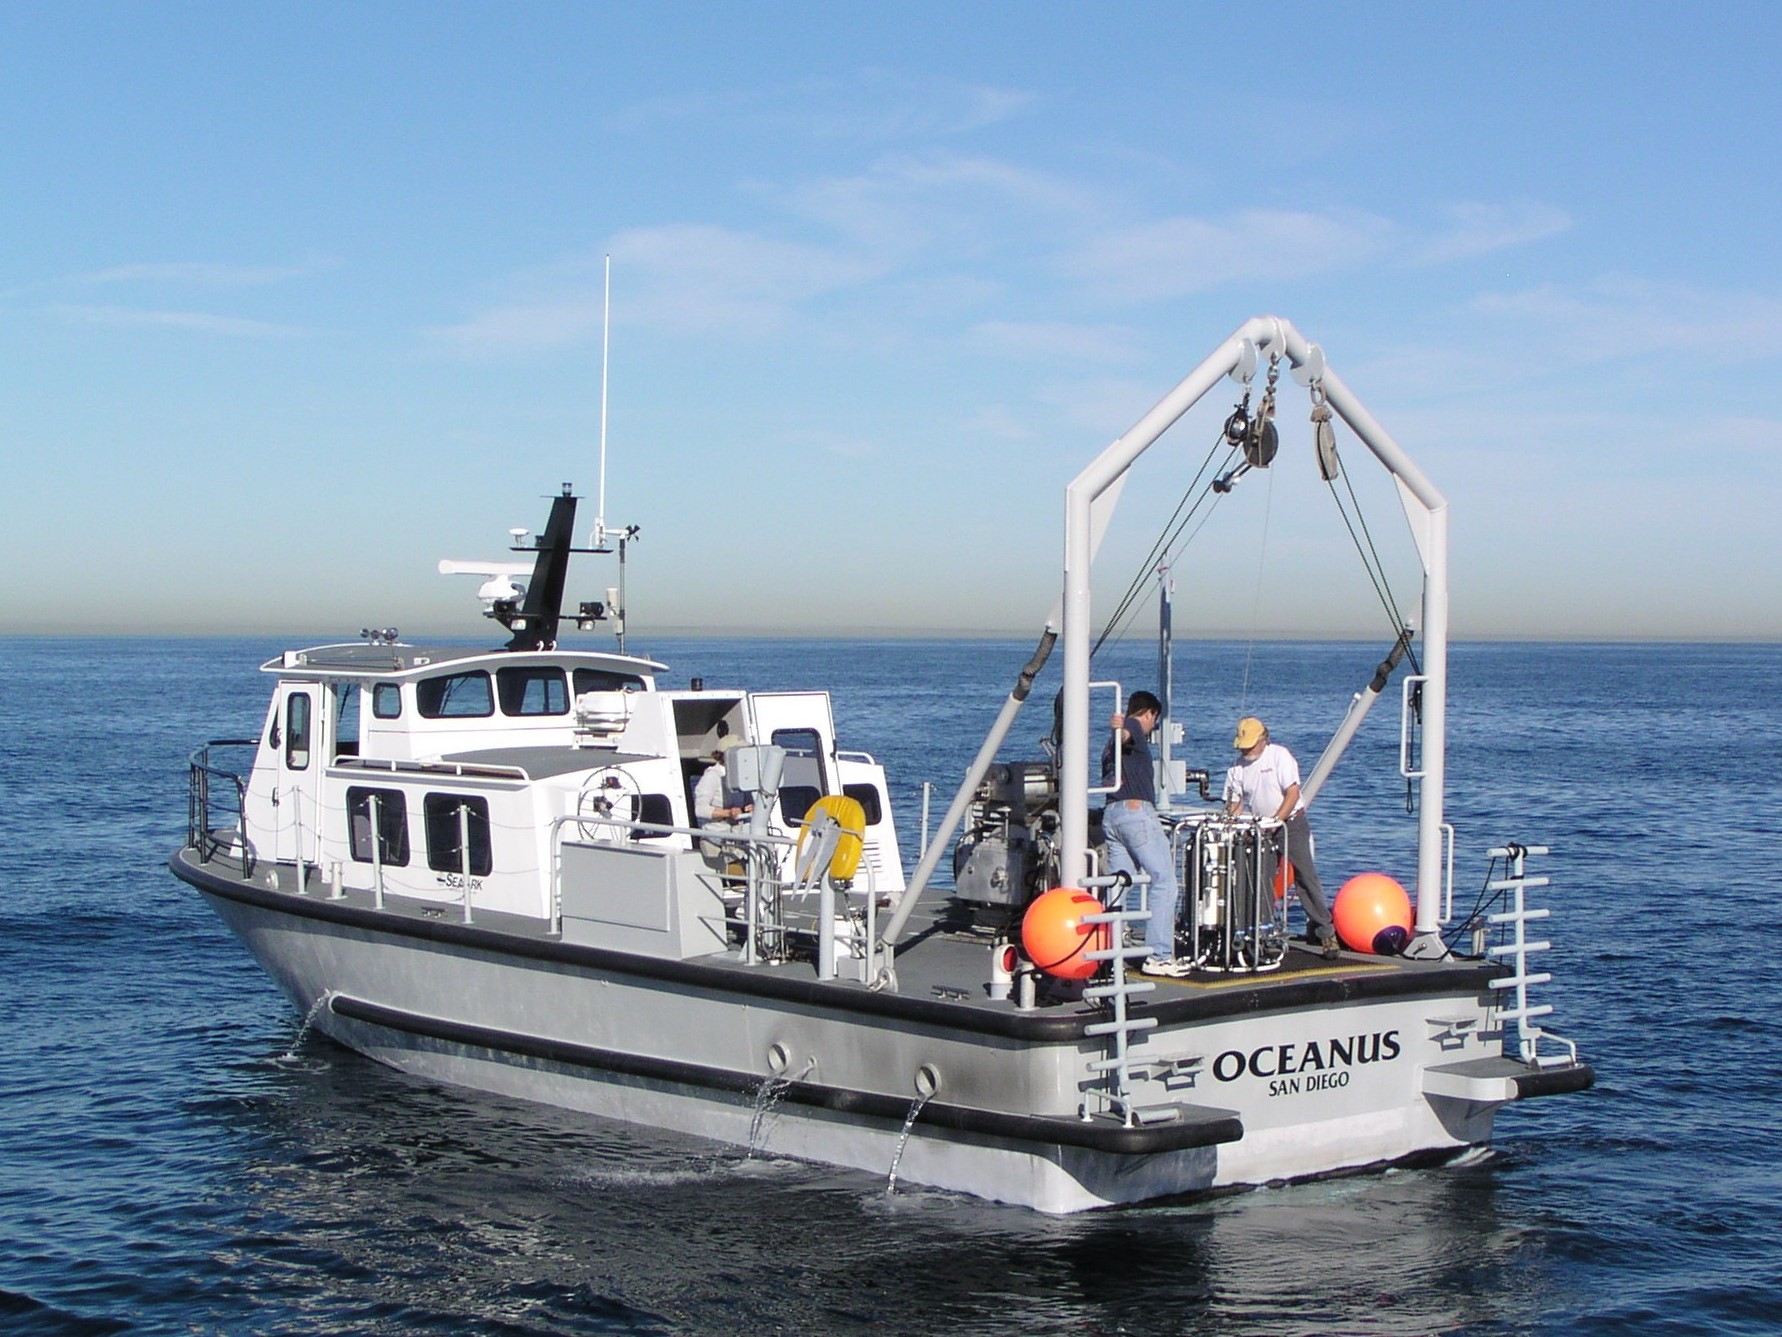 The Oceanus, one of the City's monitoring vessels.